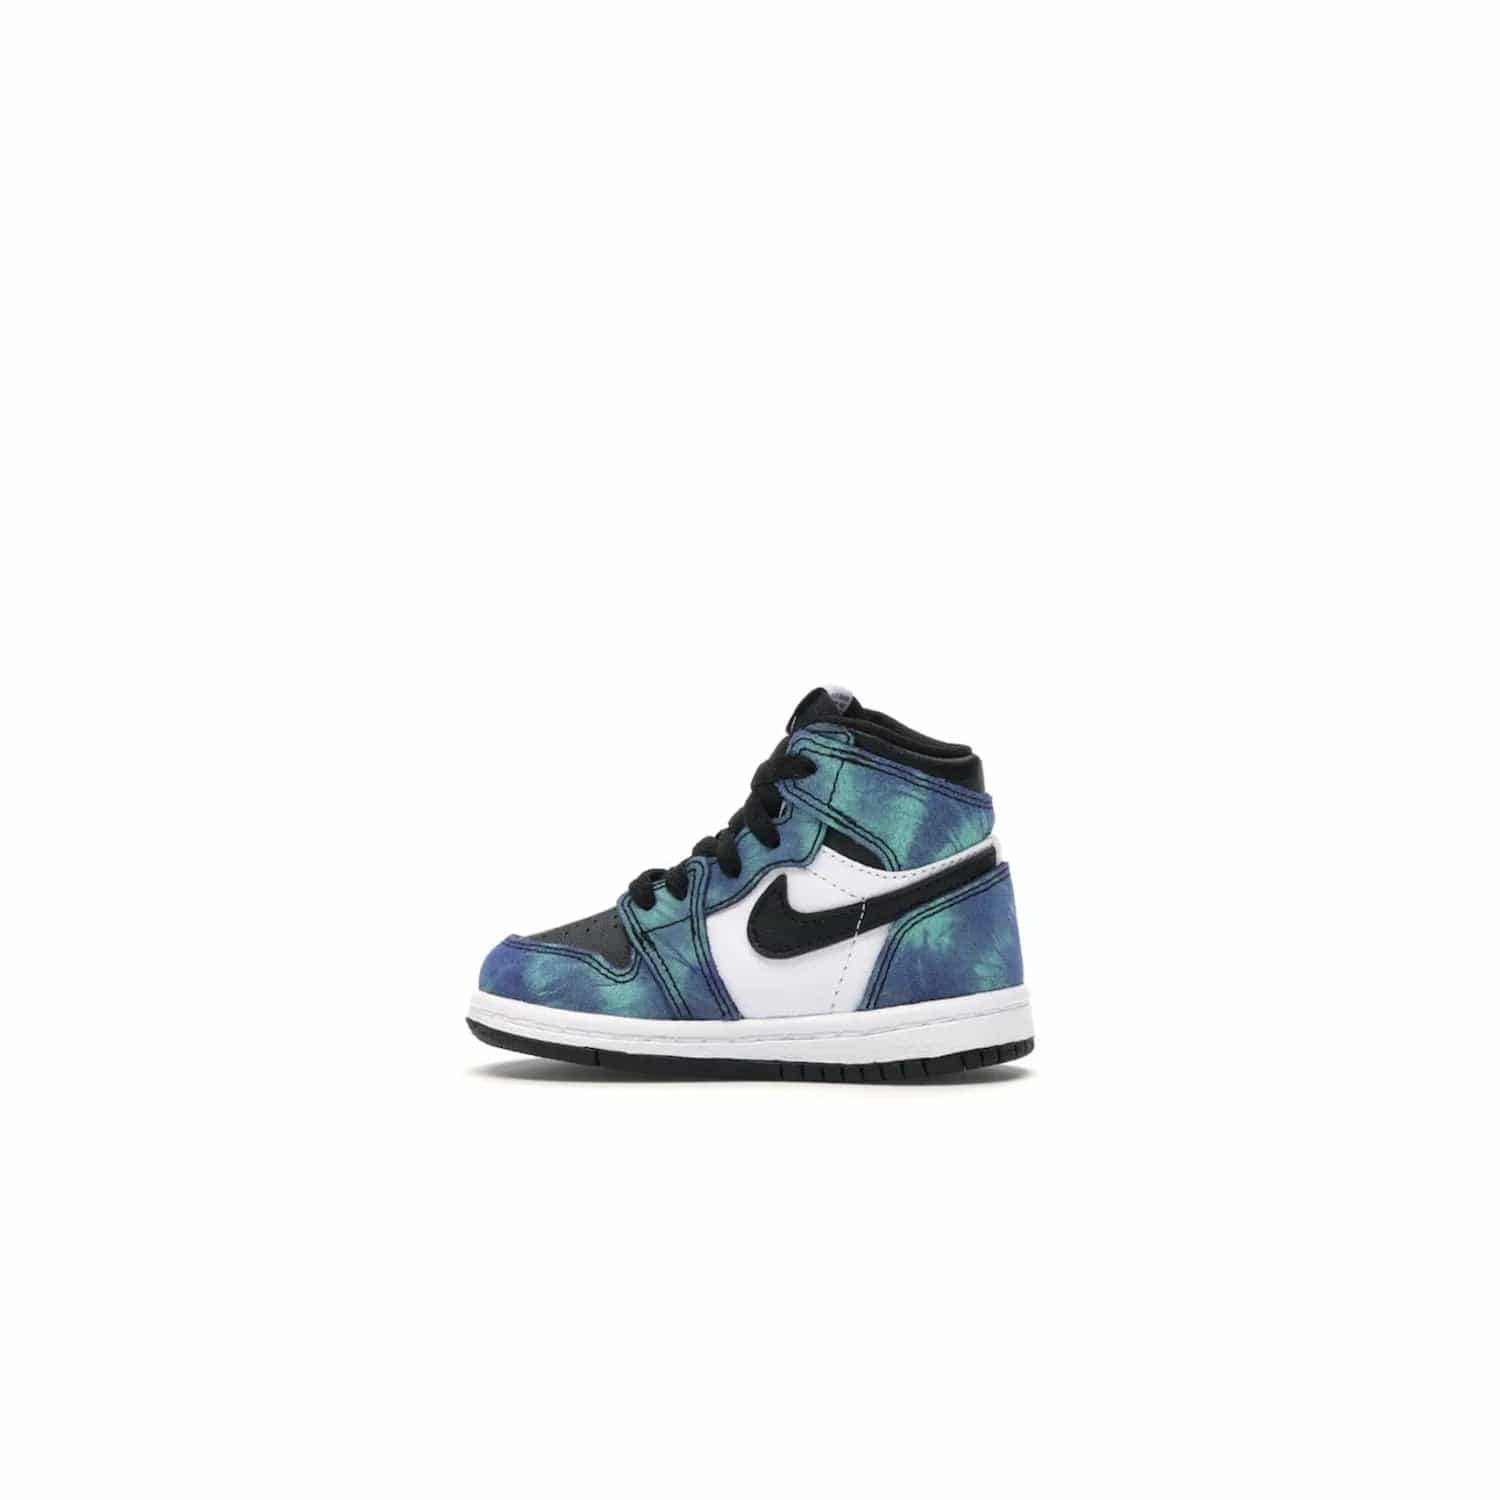 Jordan 1 Retro High Tie Dye (TD) - Image 20 - Only at www.BallersClubKickz.com - Add a unique twist to your sneaker collection with the Jordan 1 Retro High Tie Dye (TD). Classic Air Jordan 1 details like toe box perforations and the signature Swoosh logo on the sidewall are topped with an eye-catching tie dye design that’s perfect for styling all year round.